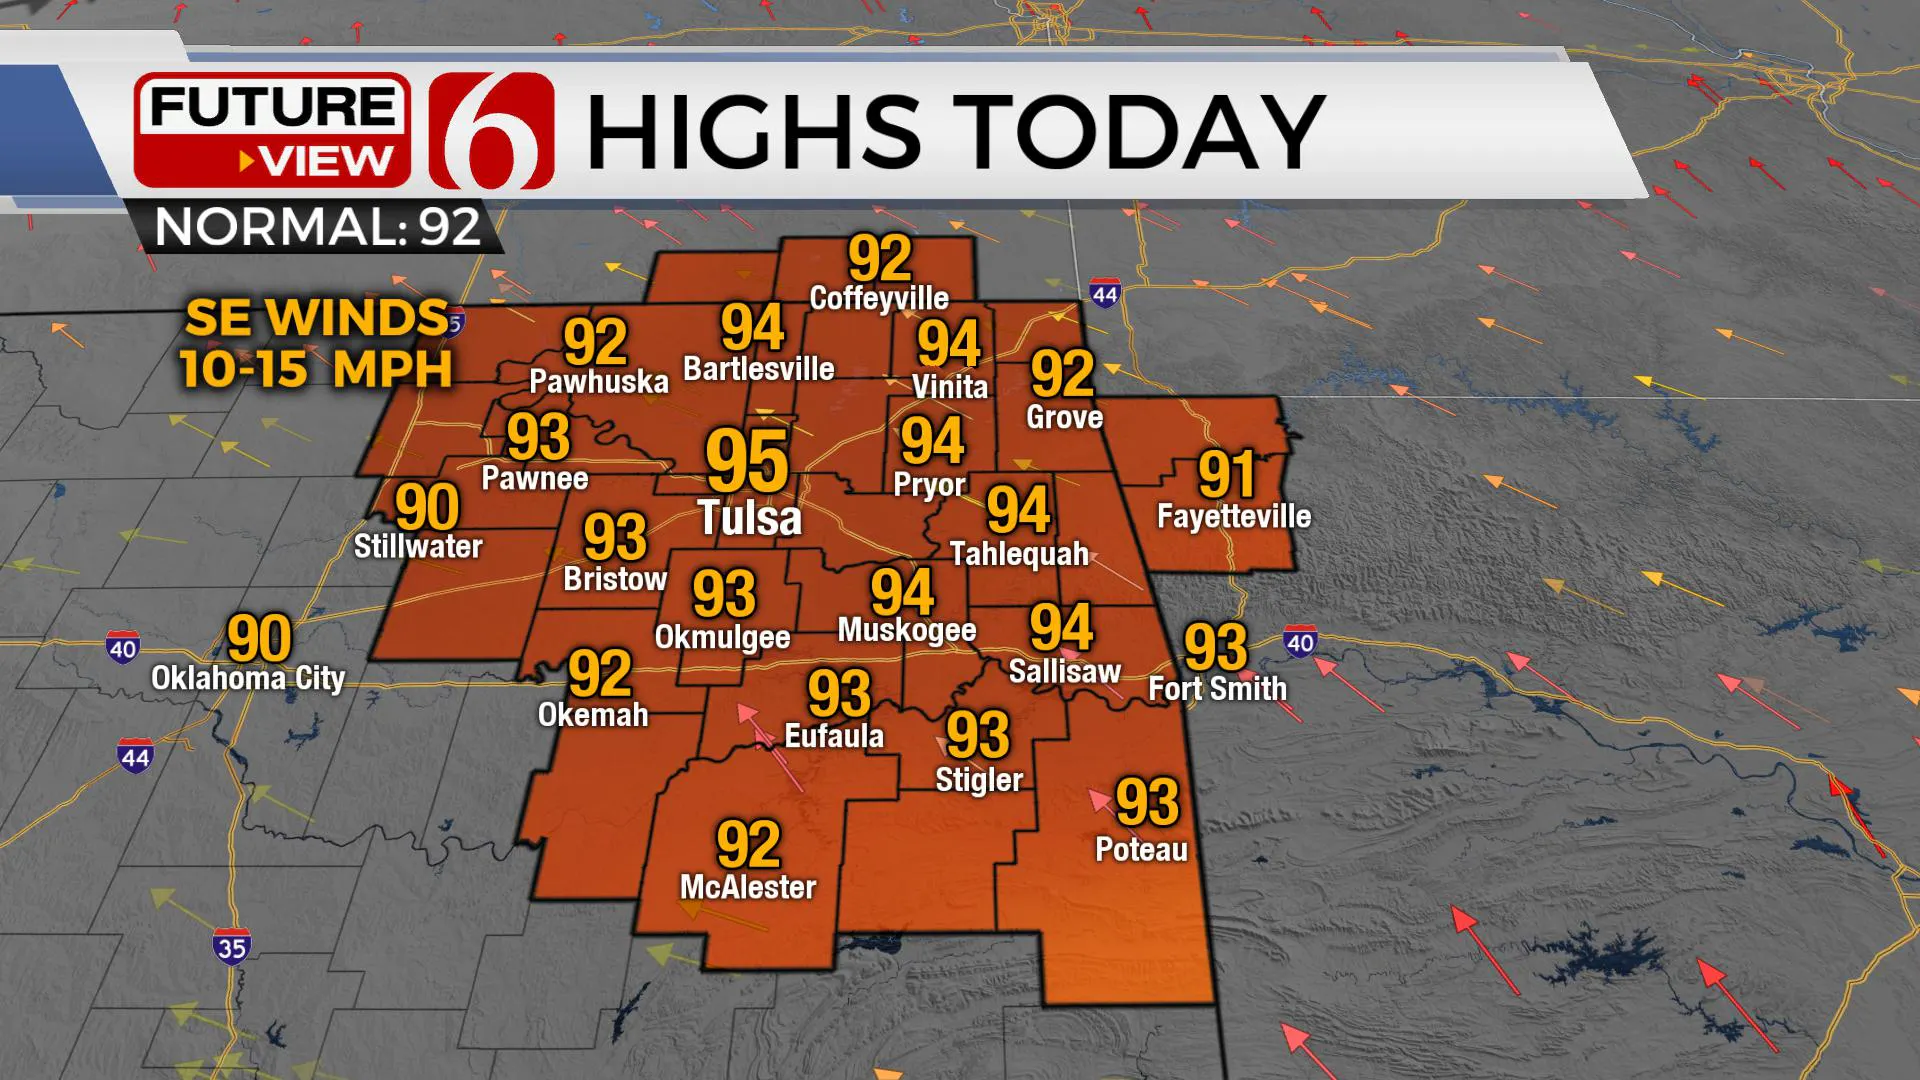 Highs for today